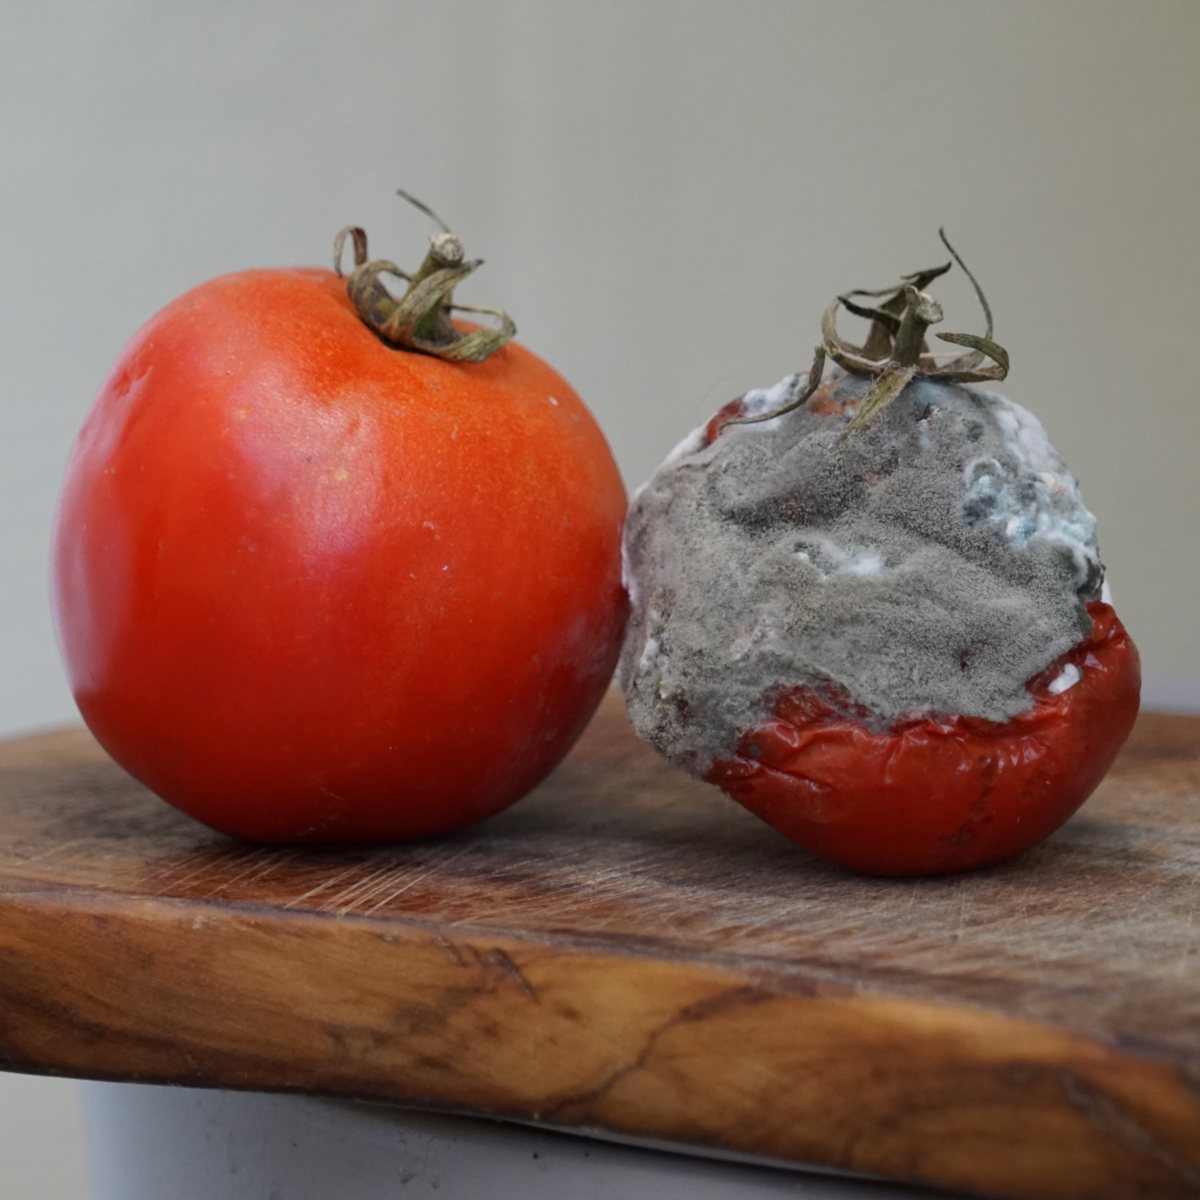 Moldy tomato next to a healthy one.